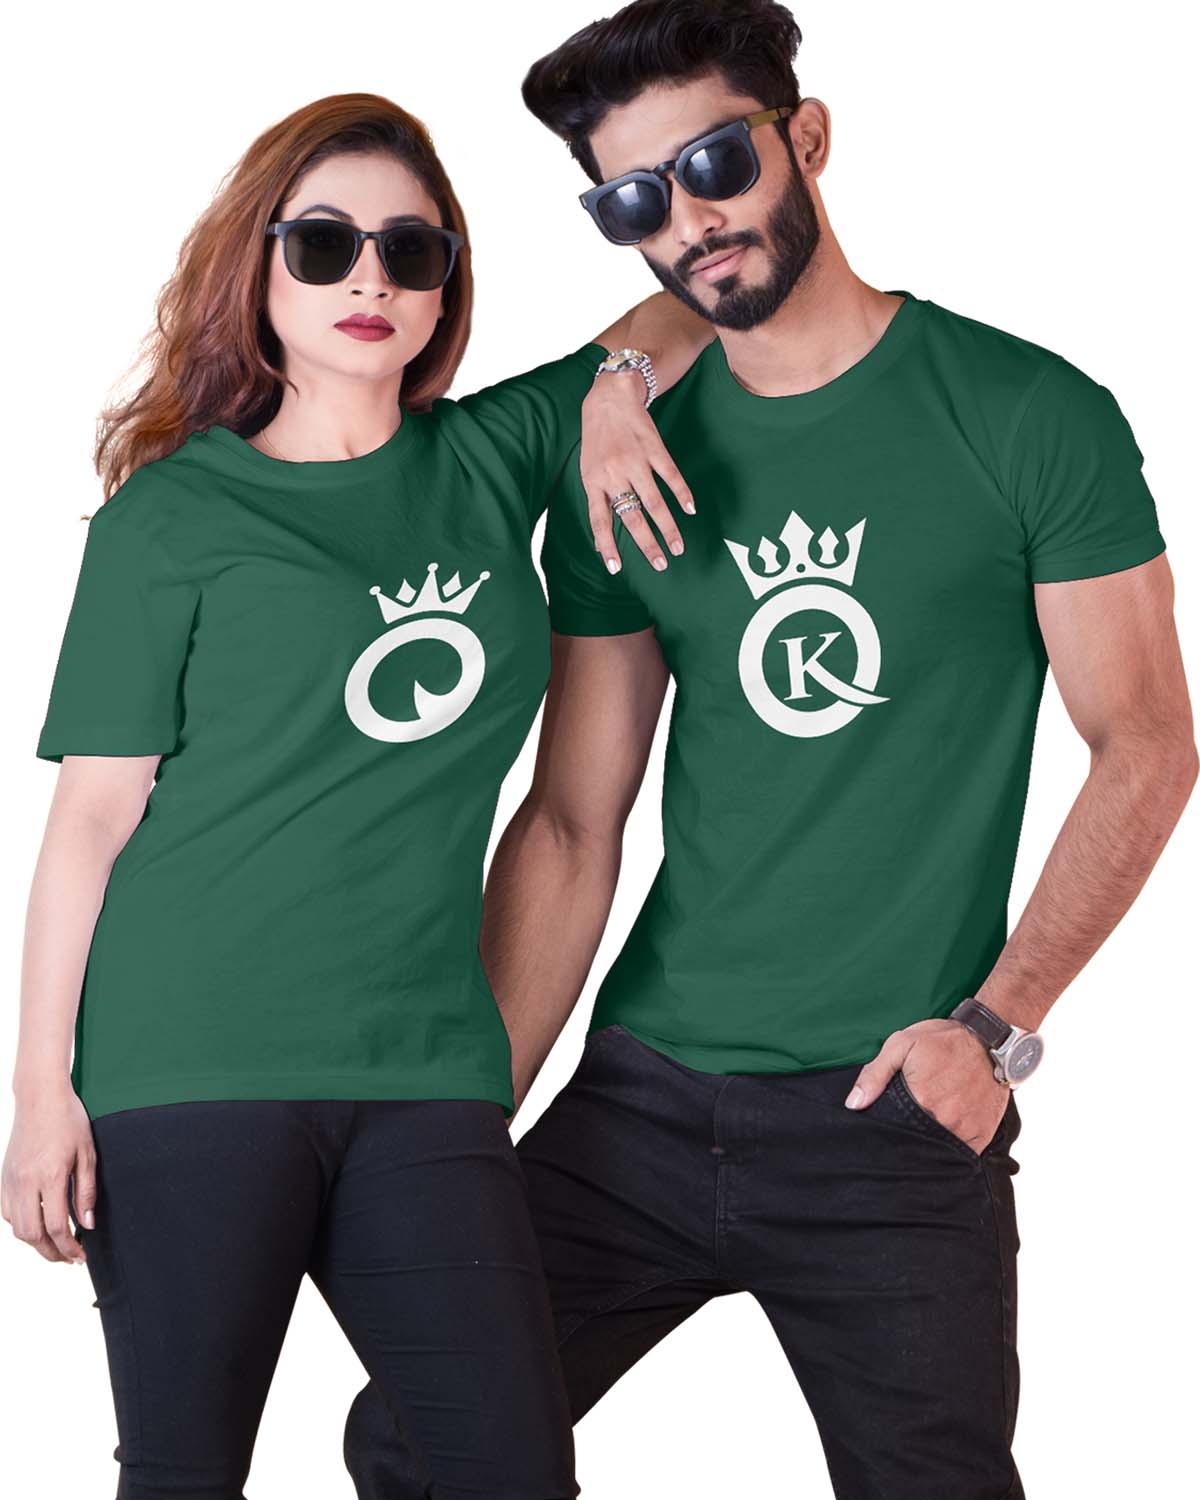 King And Queen Letter Couple T-Shirt